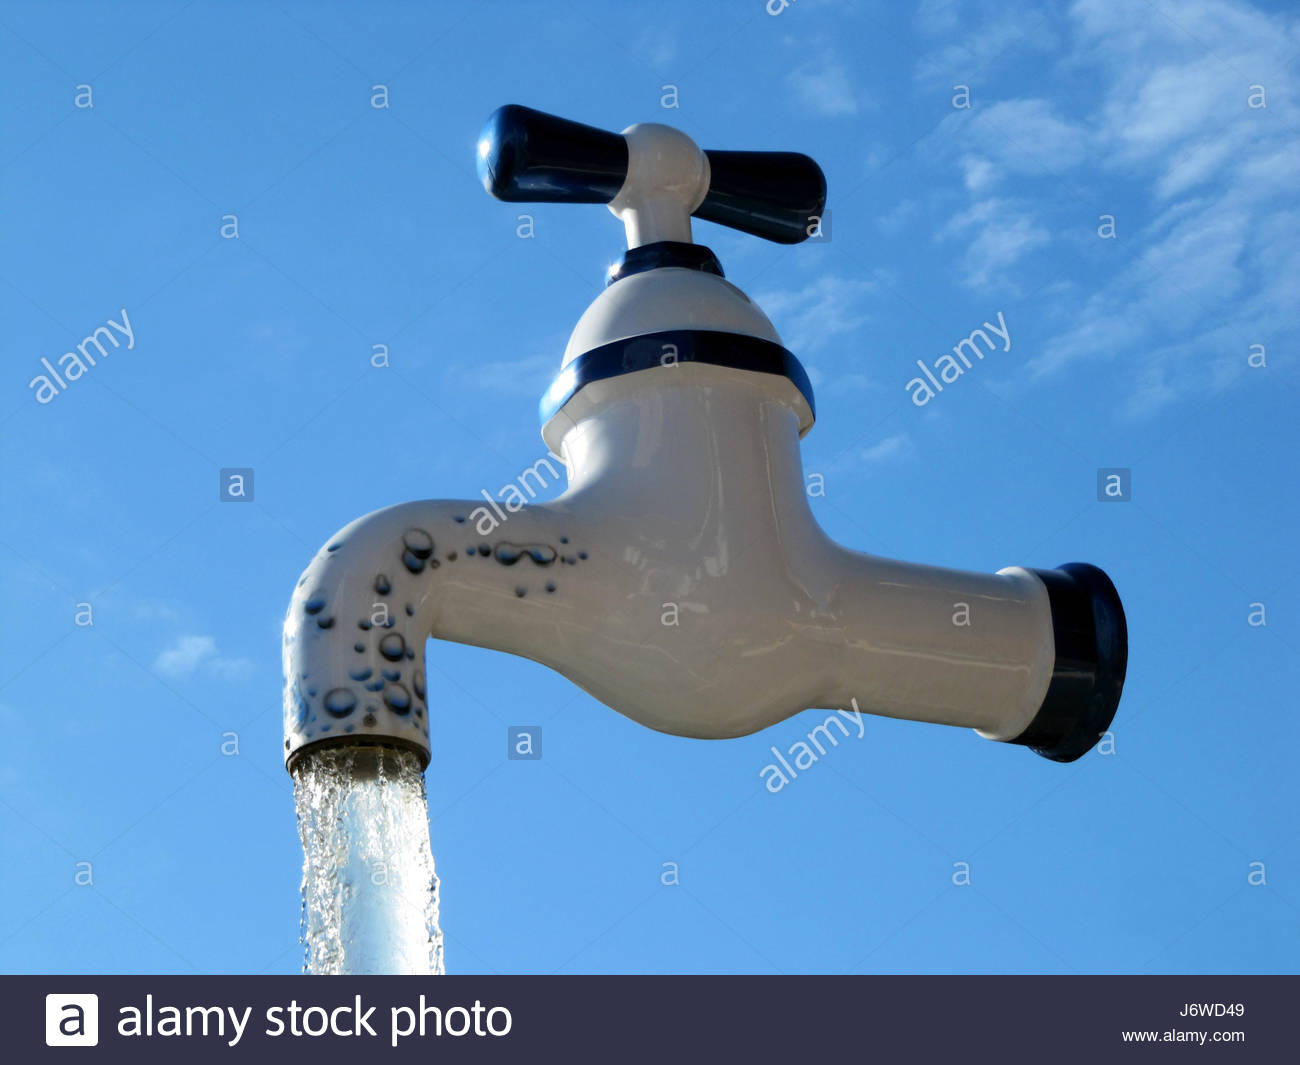 Floating Faucet Stock Photo 141929993 Alamy